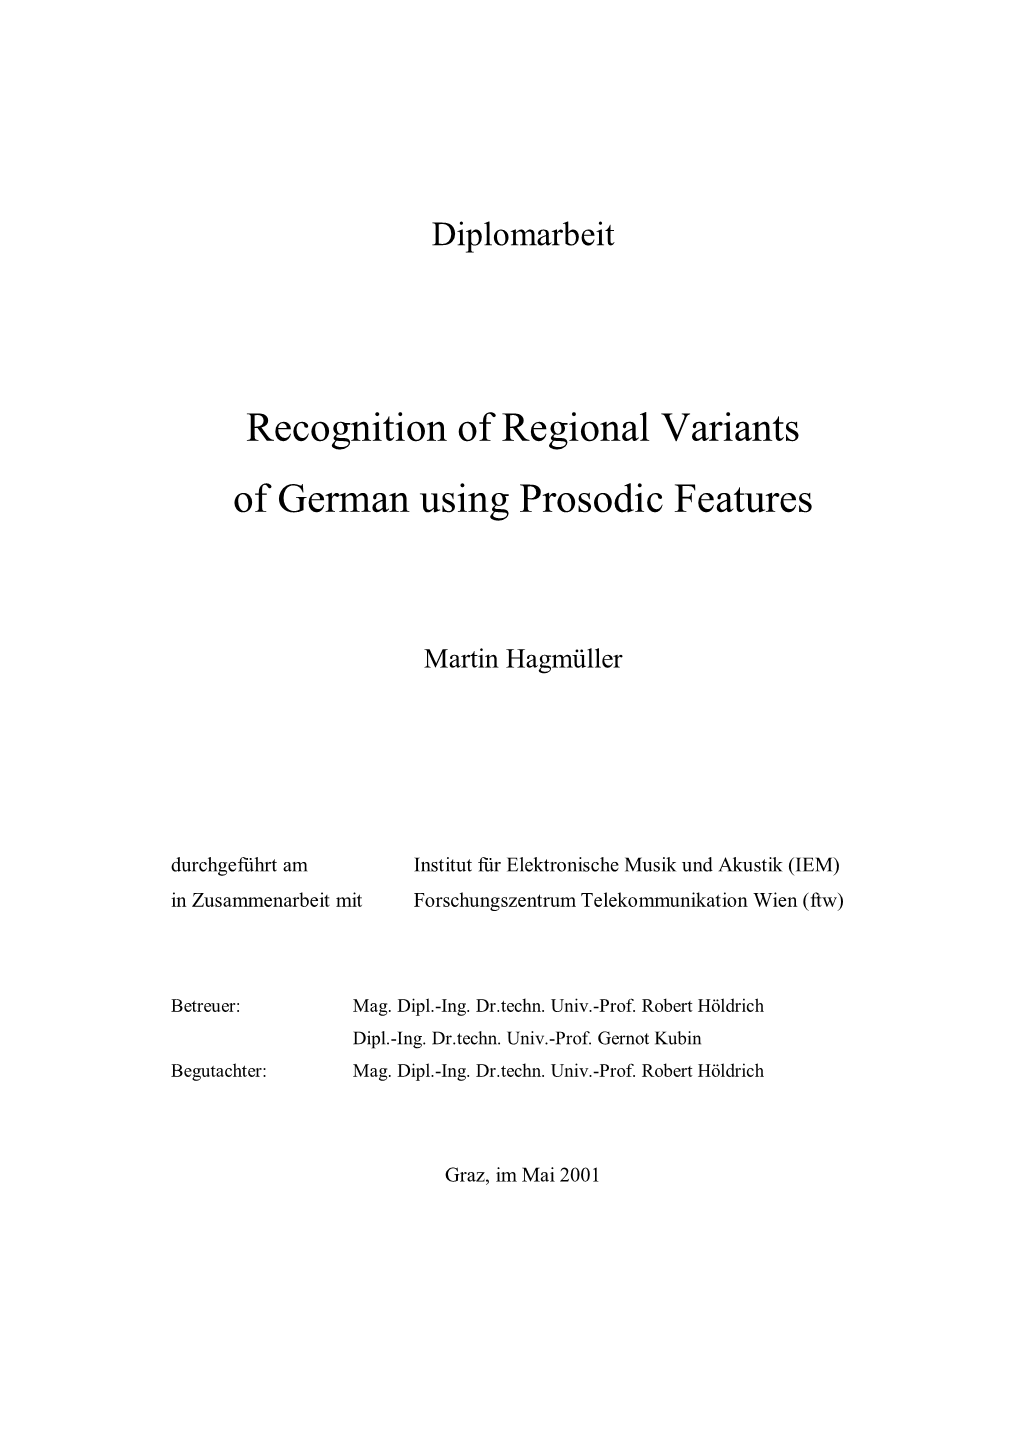 Recognition of Regional Variants of German Using Prosodic Features